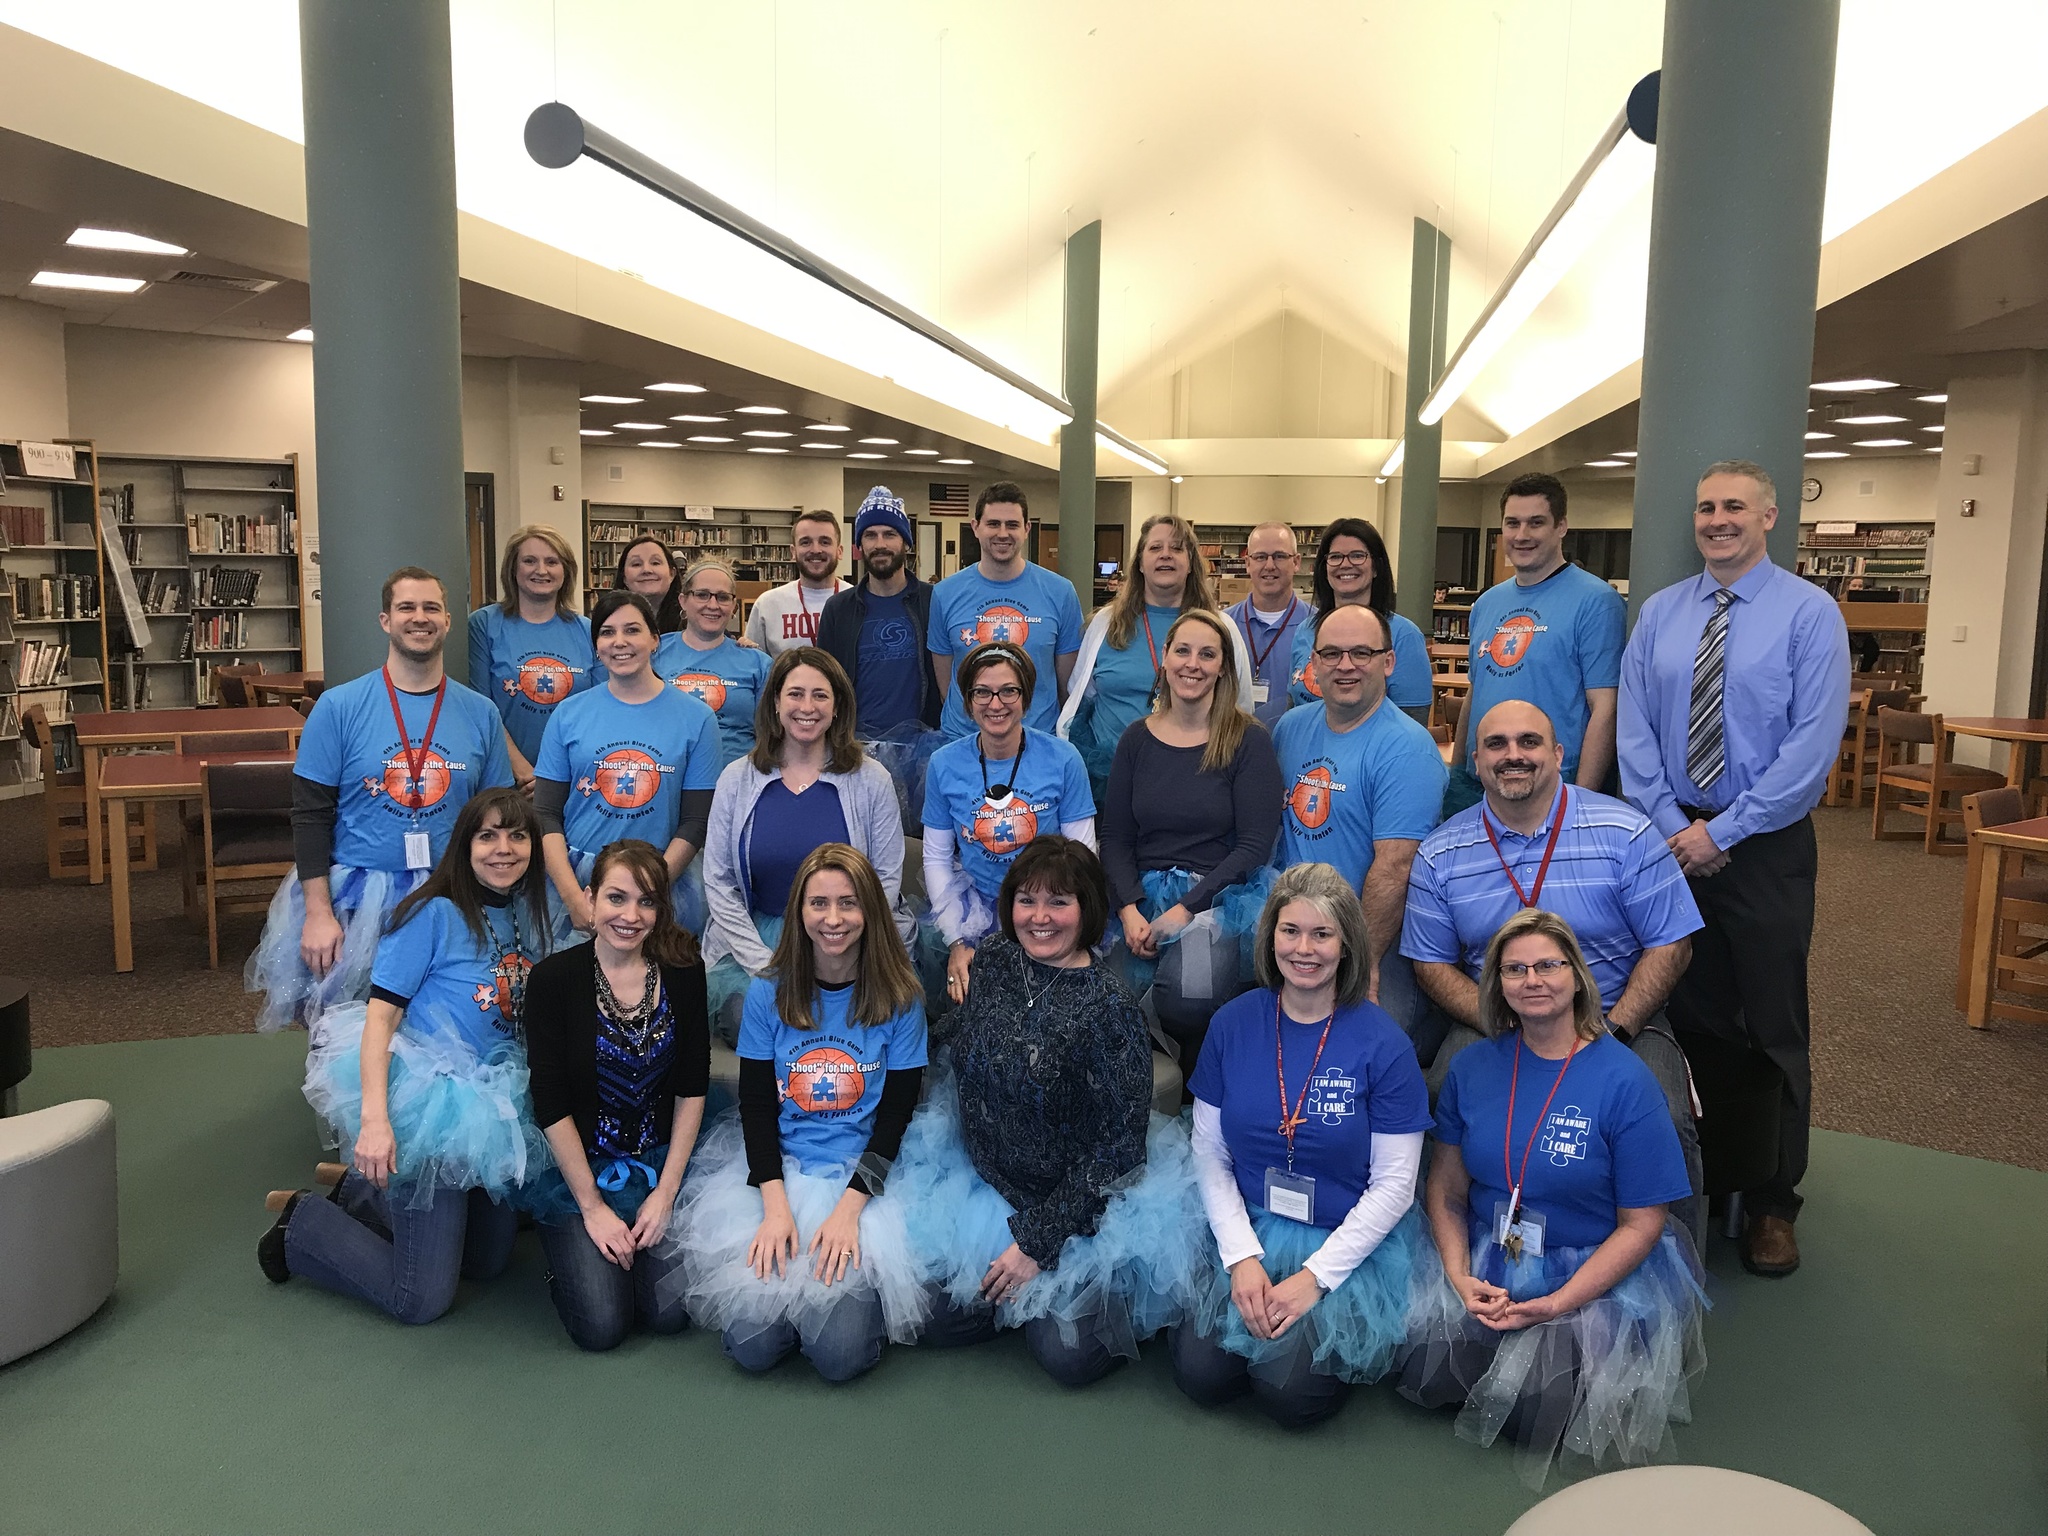 Staff at HHS in their blue shirts and tutus